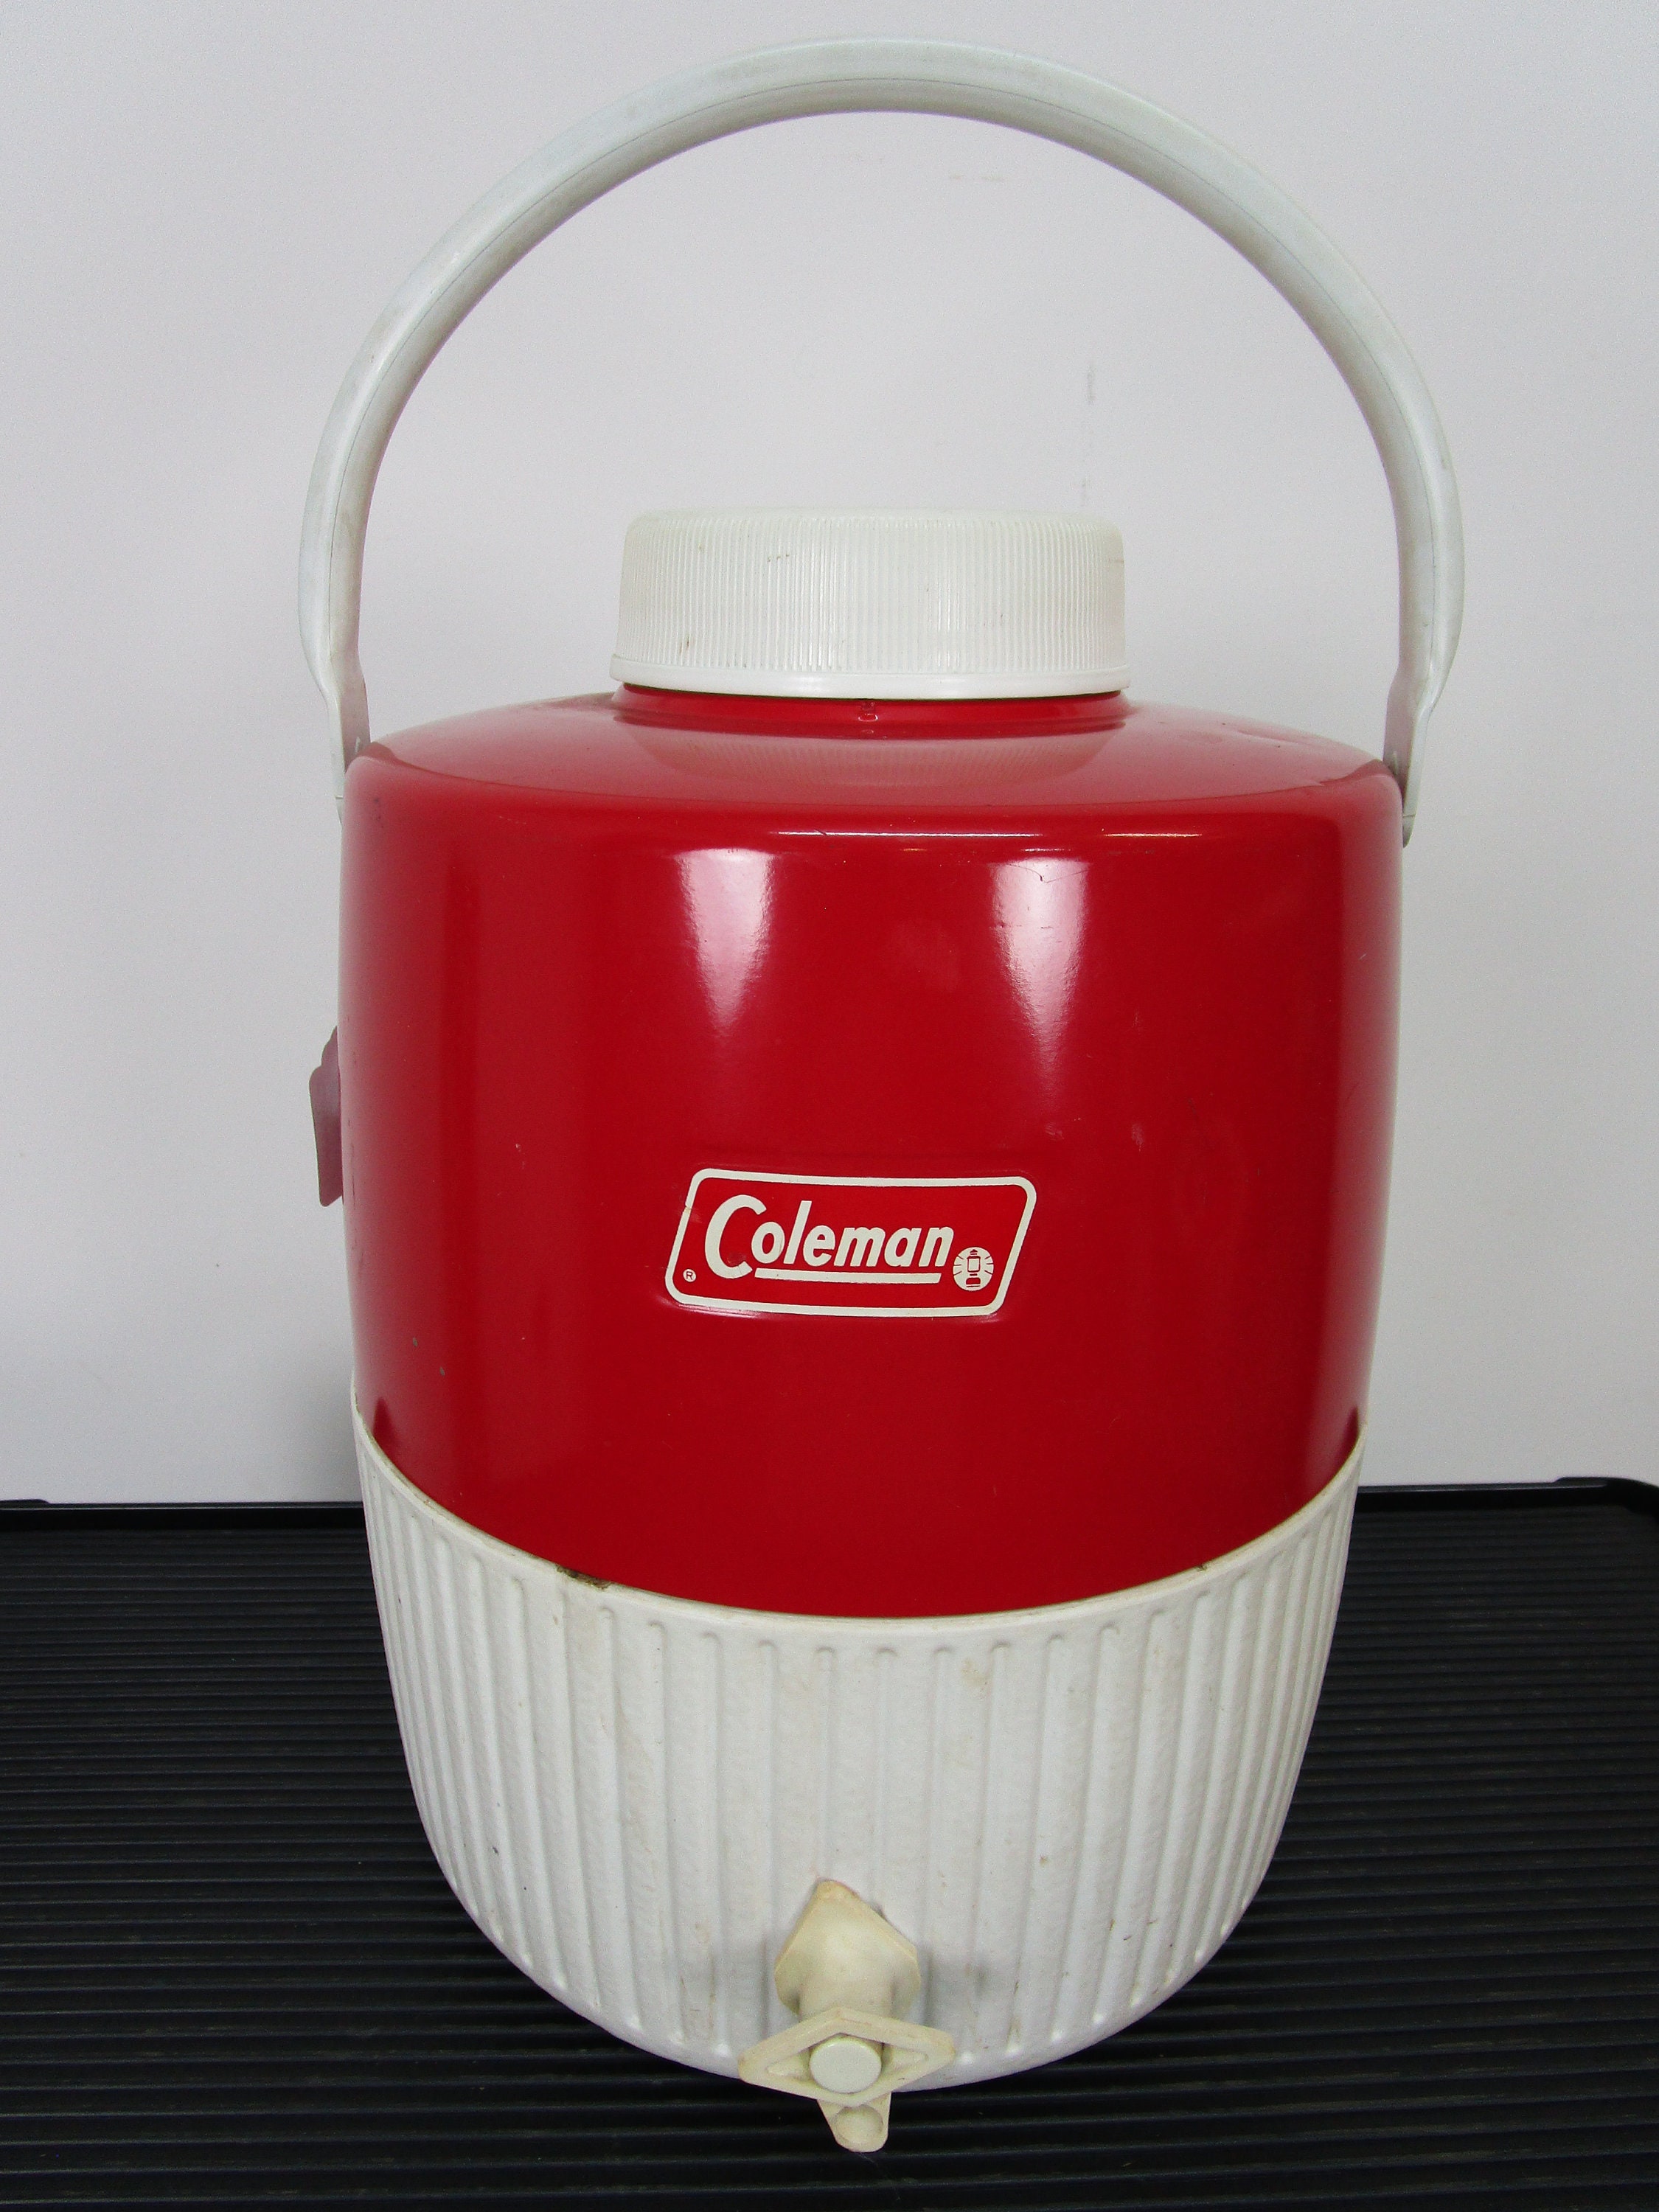 Coleman 1/2 Gallon Water Jug Cooler Bottle Red 6009 Model With Lid